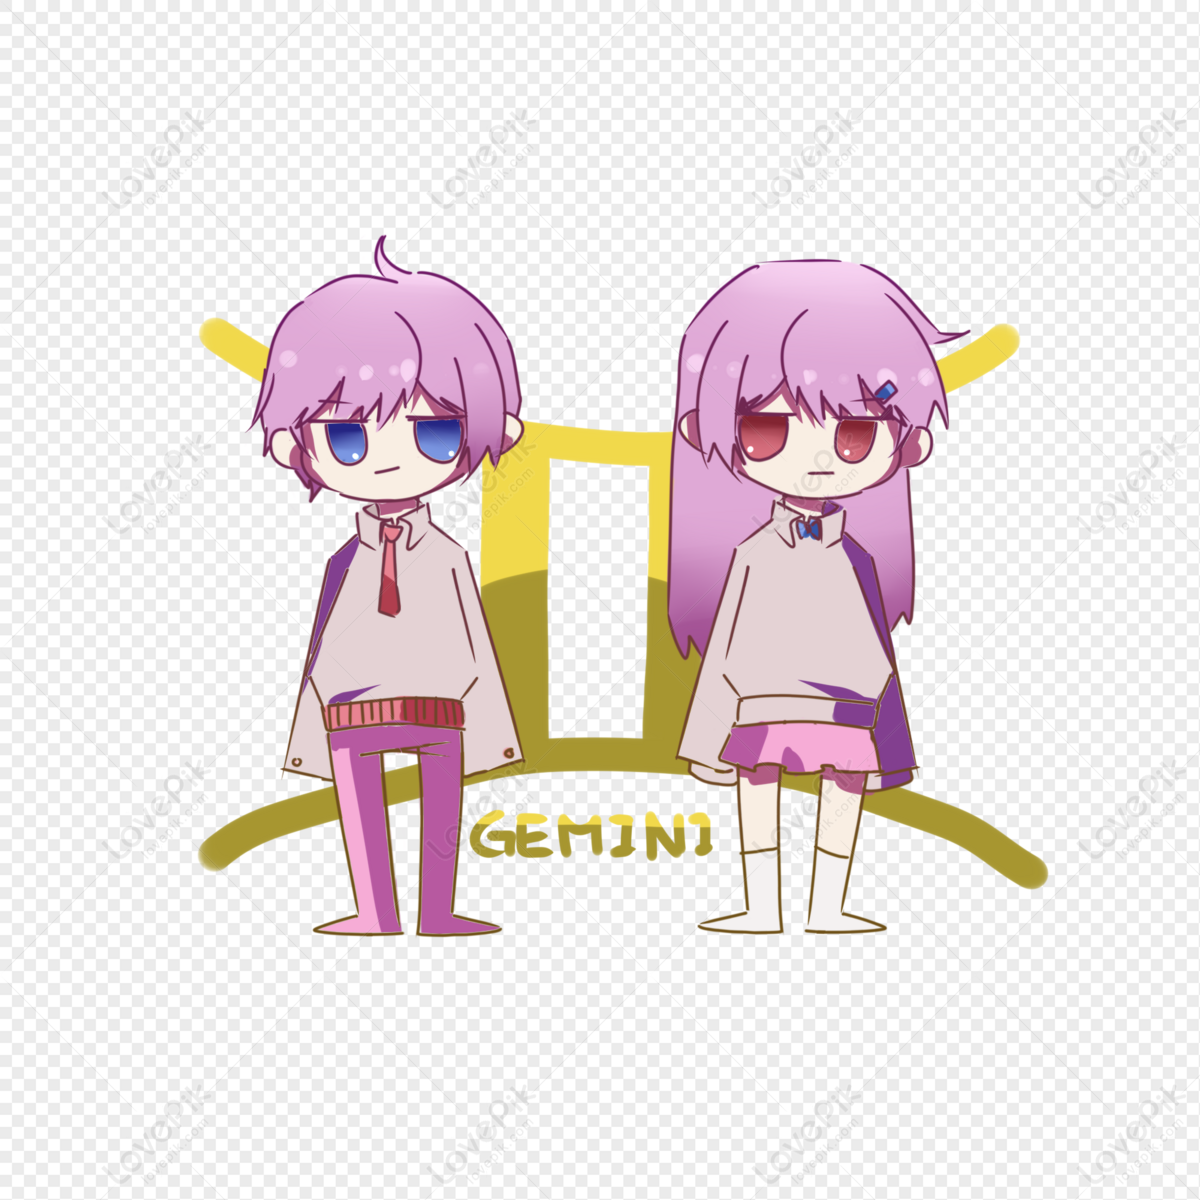 Twelve Constellations Cute Gemini Cartoon Character Elements, Anime Girls,  Cute Character, Cute Cartoon PNG Hd Transparent Image And Clipart Image For  Free Download - Lovepik | 401345094